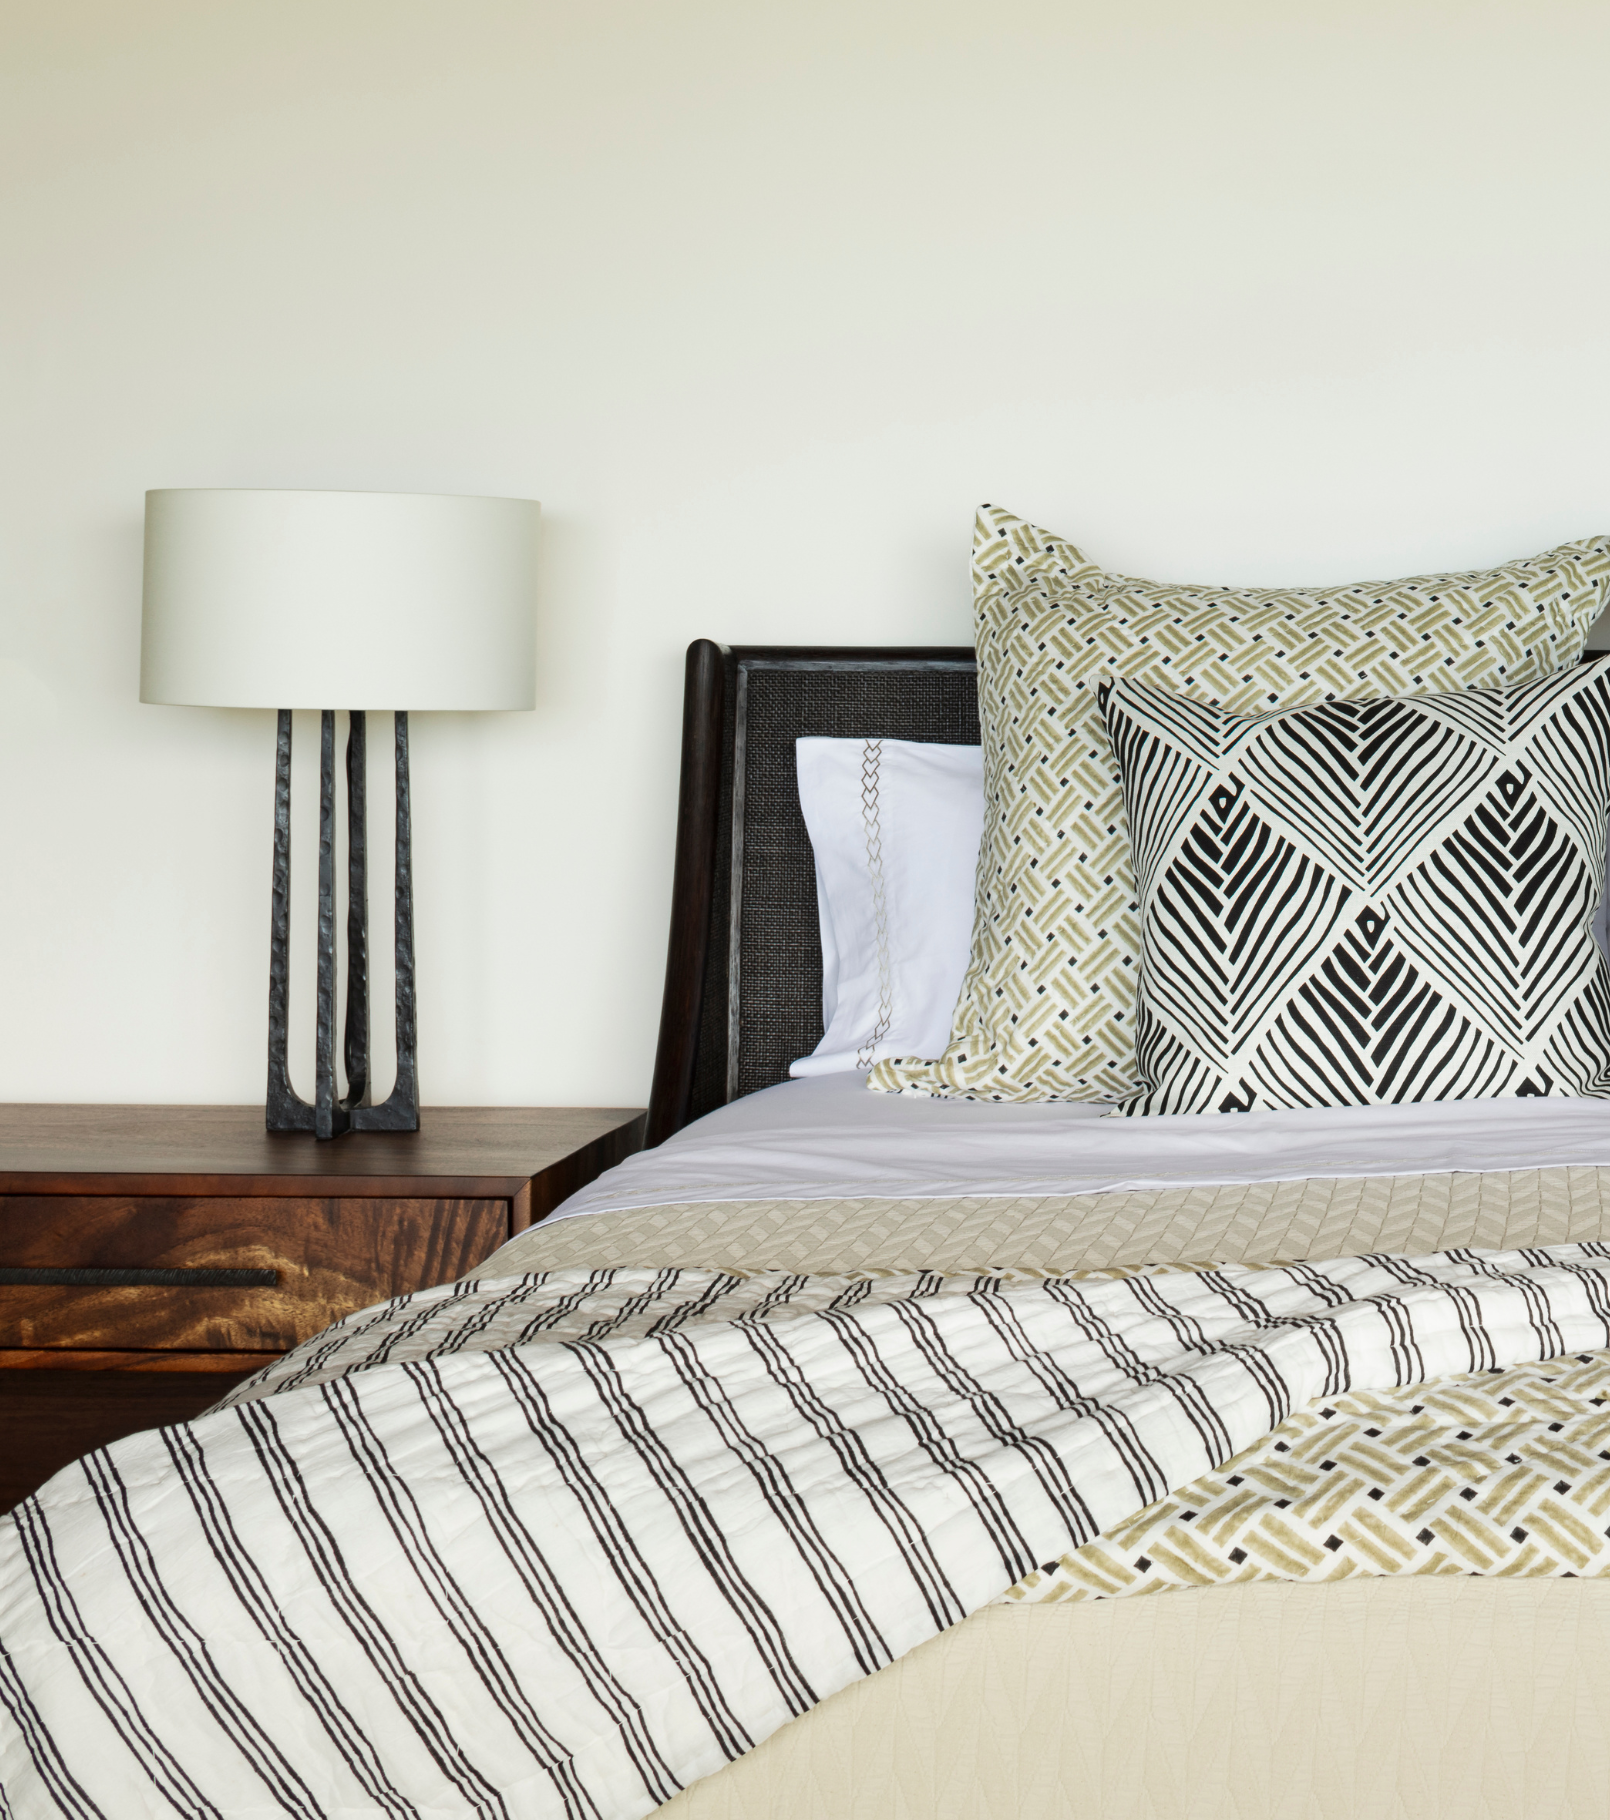 Averylily pure cotton matelassé coverlet in Sand. Styled with Averylily Big Island Bedding in Sand & Basalt, Watermark Sheeting in Sand, and Serena Dugan Studio decorative pillow.